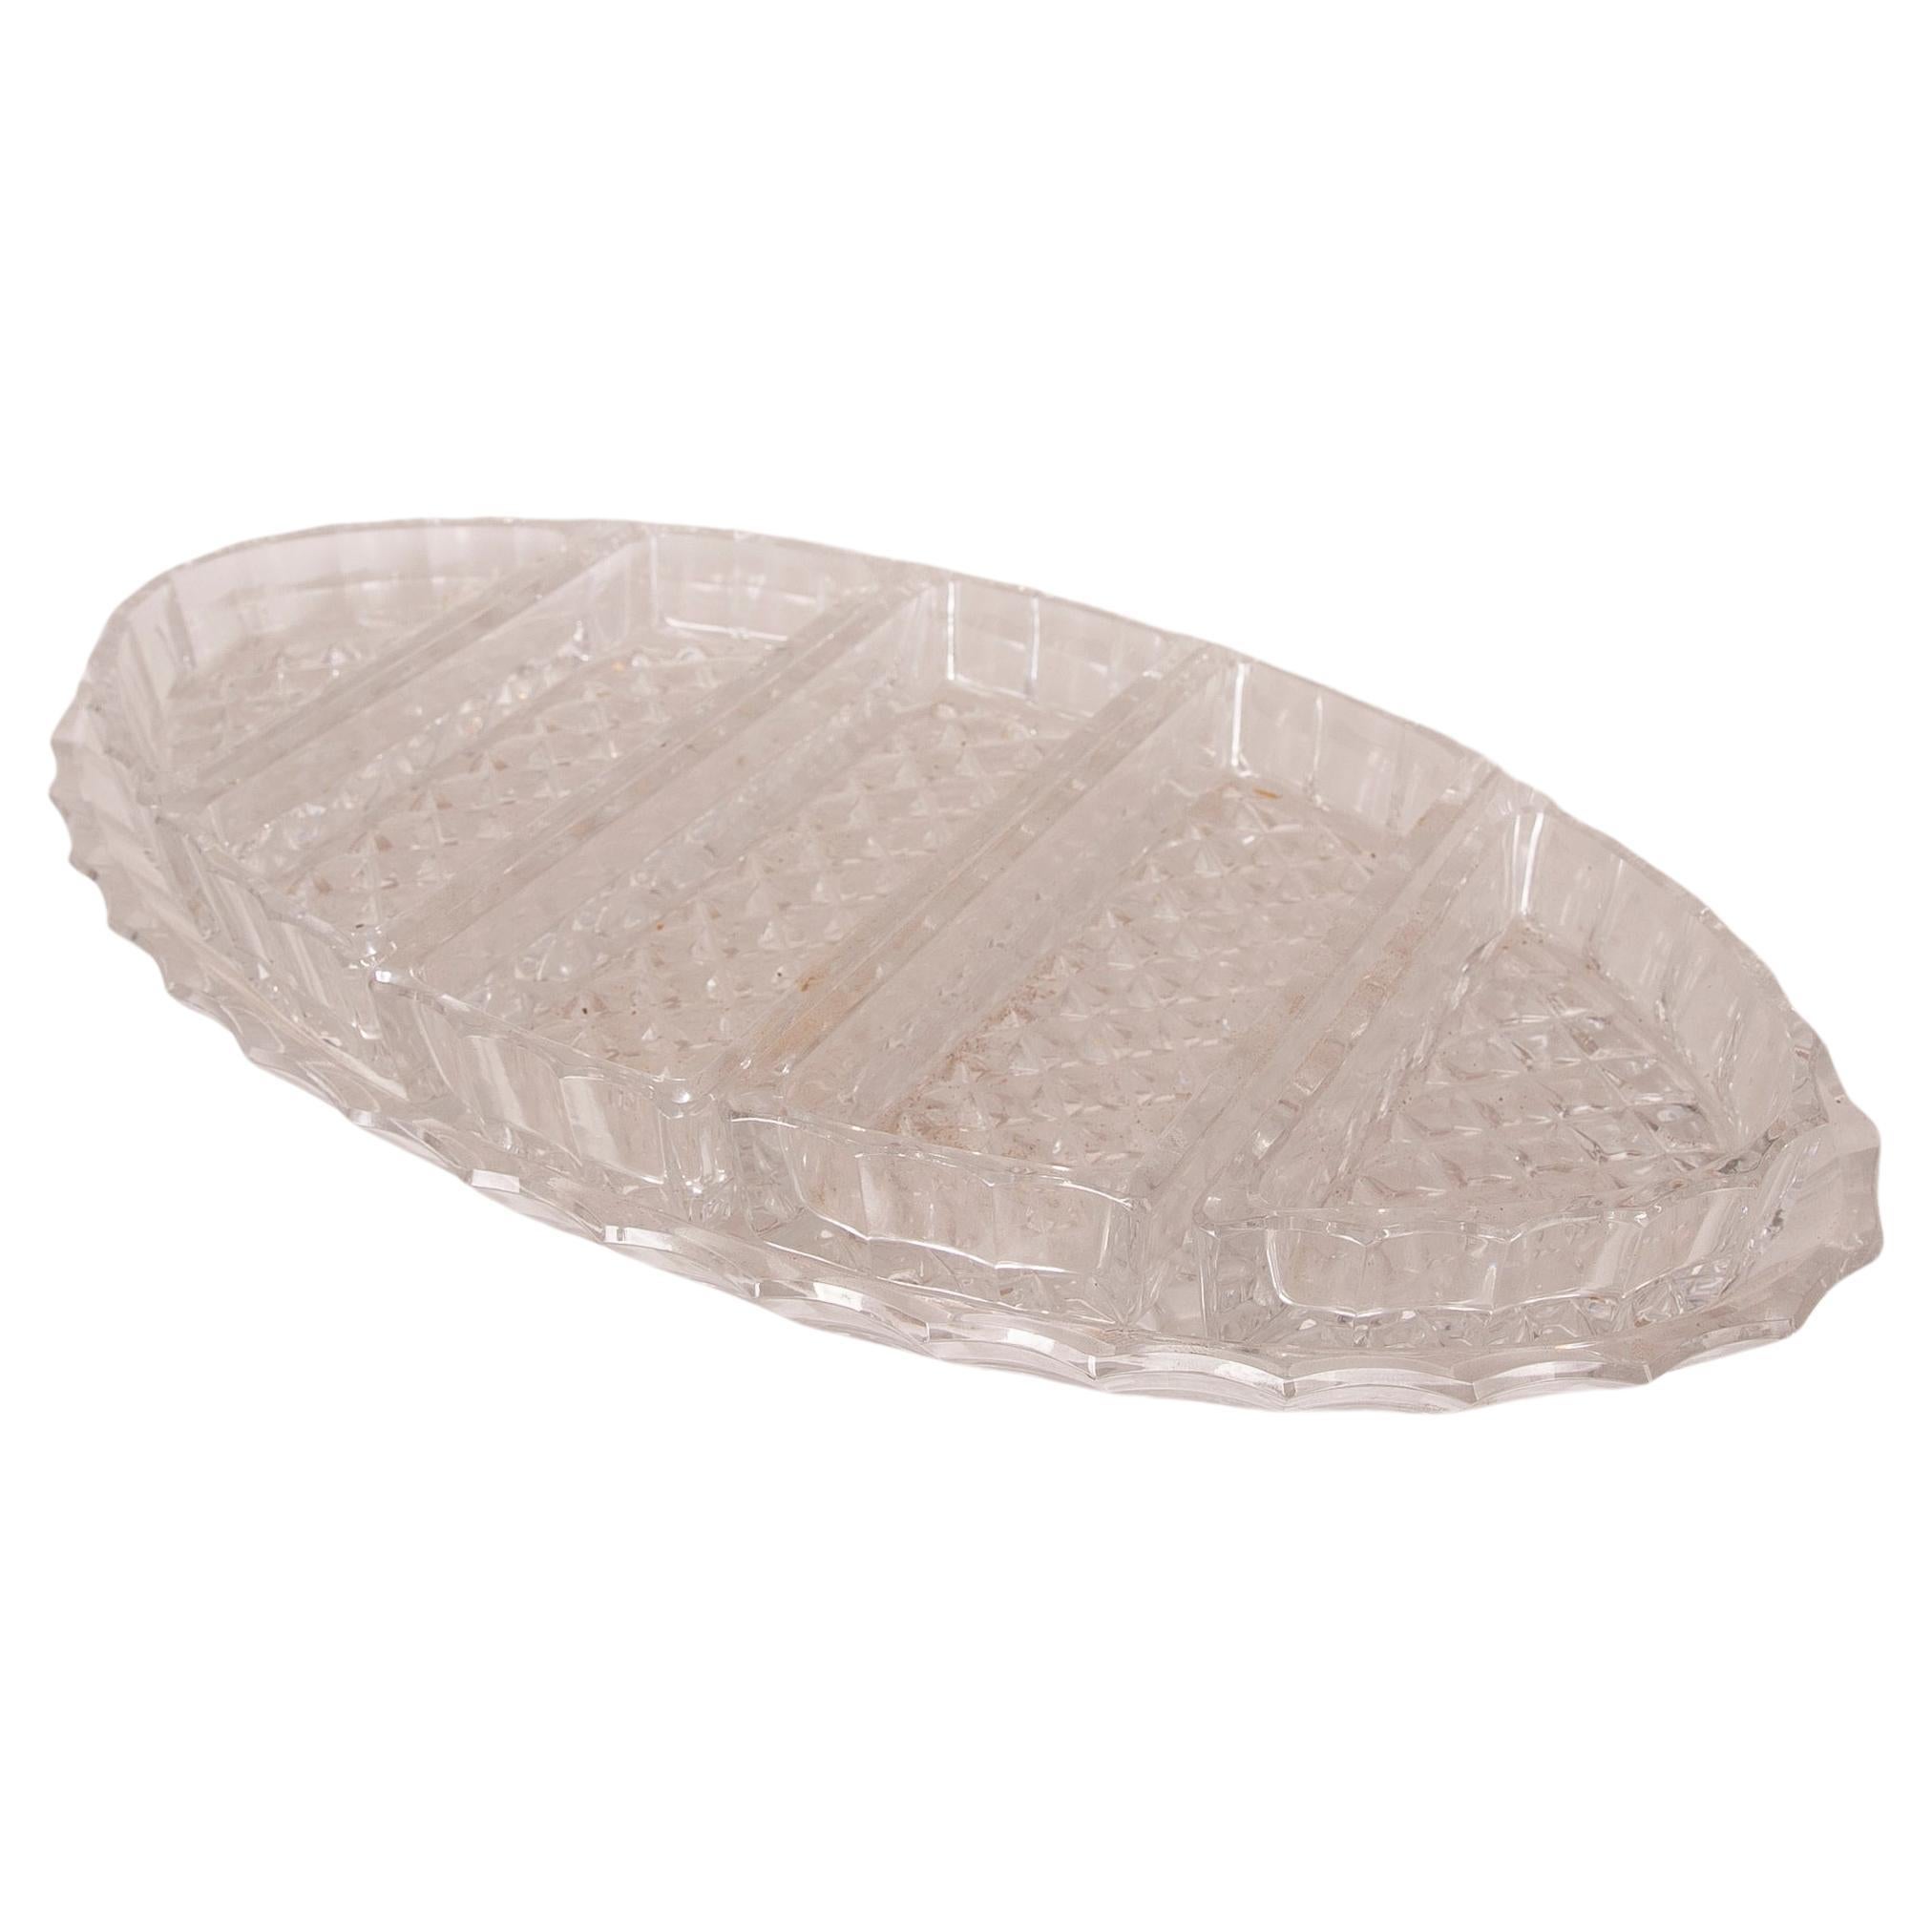 Carved Glass Tray with Individual Containers on the Tray For Sale